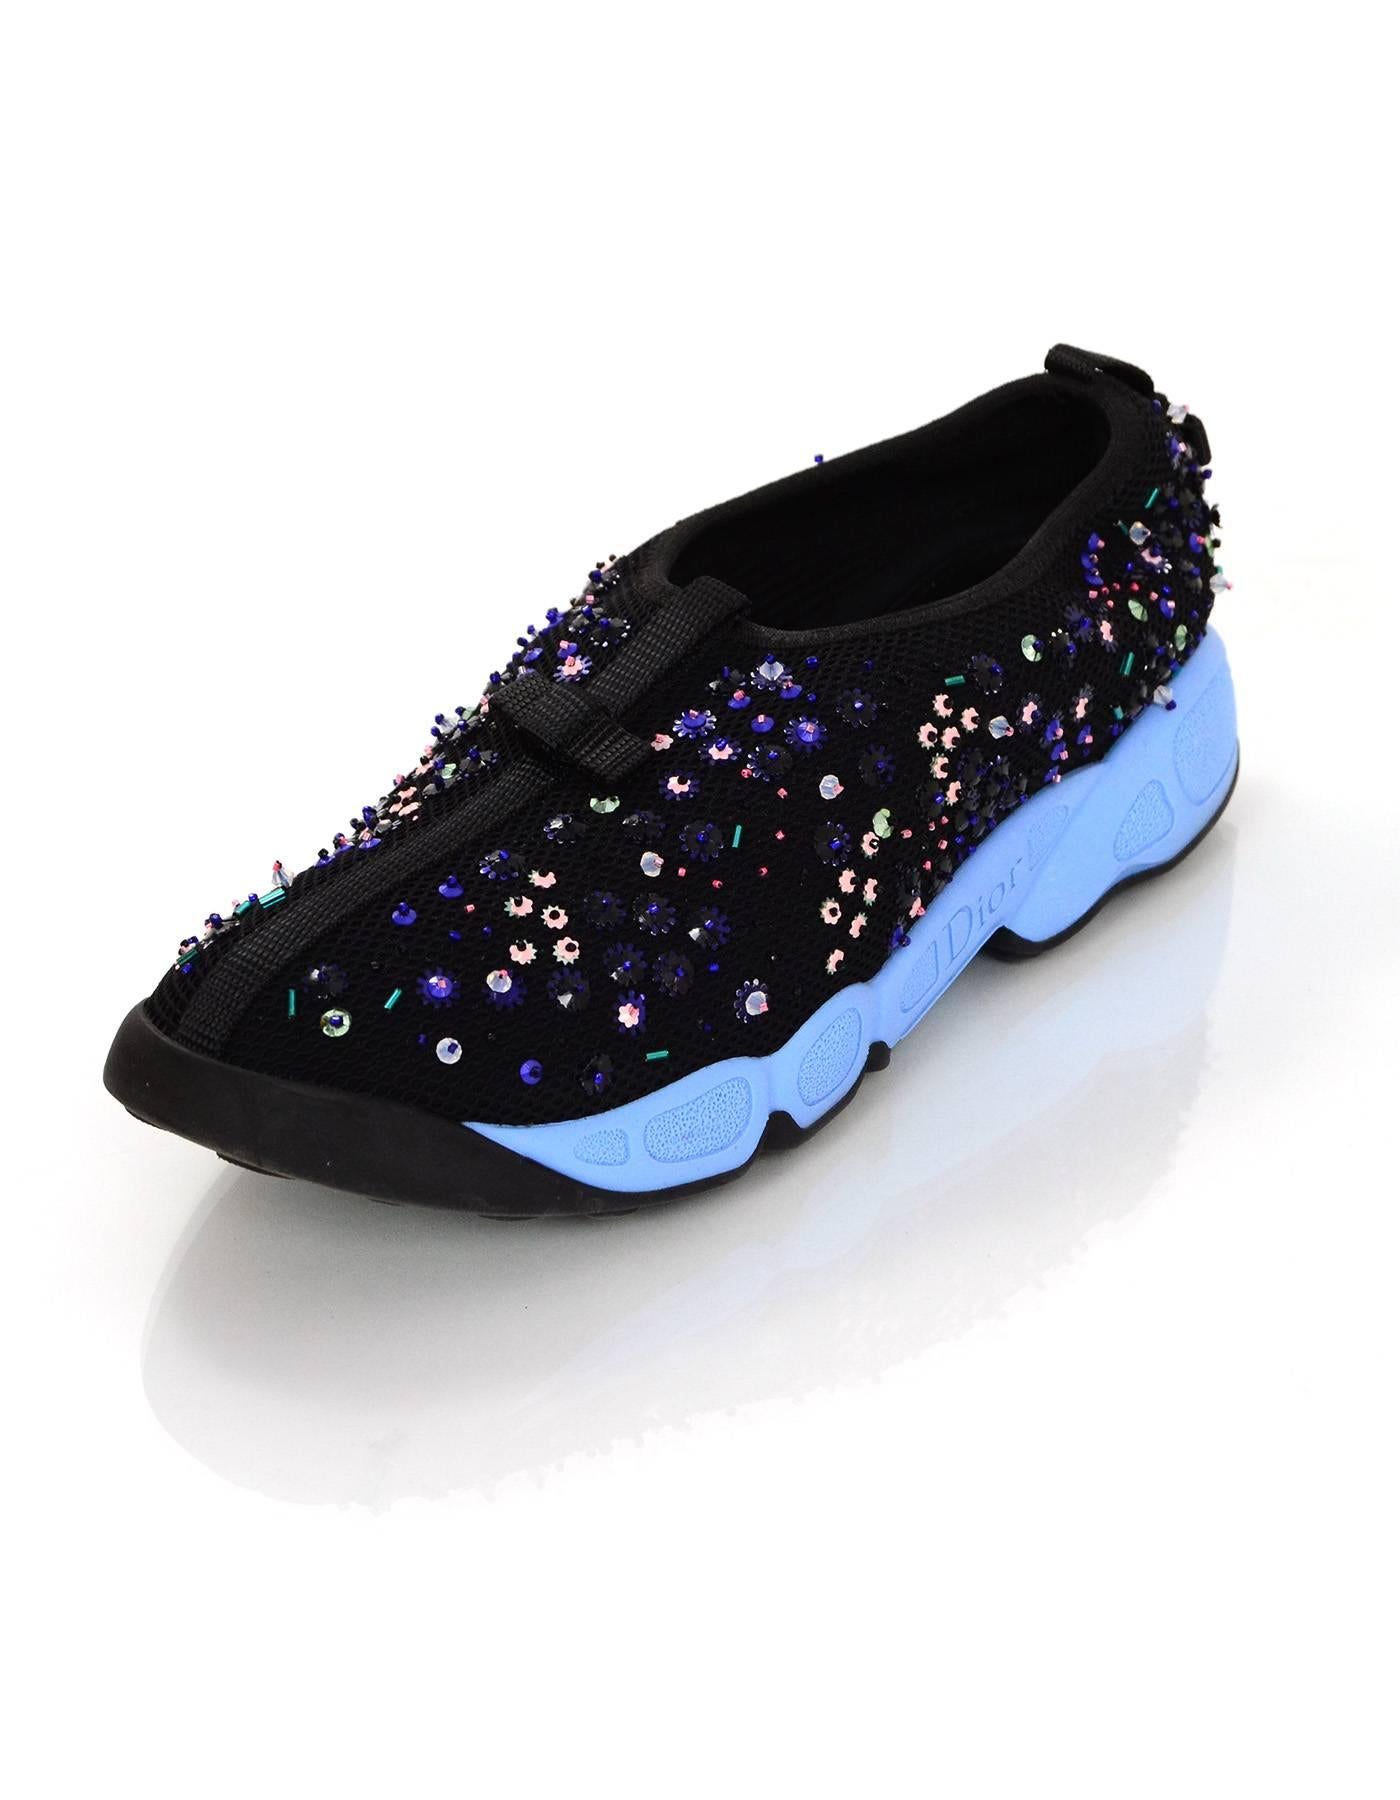 Christian Dior Black and Blue Beaded Fusion Sneakers Sz 38.5
Features beading throughout

Made In: Italy
Color: Black, blue
Materials: Nylon/mesh blend, beads, rubber
Closure/Opening: Slide on
Sole Stamp: Dior Made in Italy 38.5
Overall Condition: